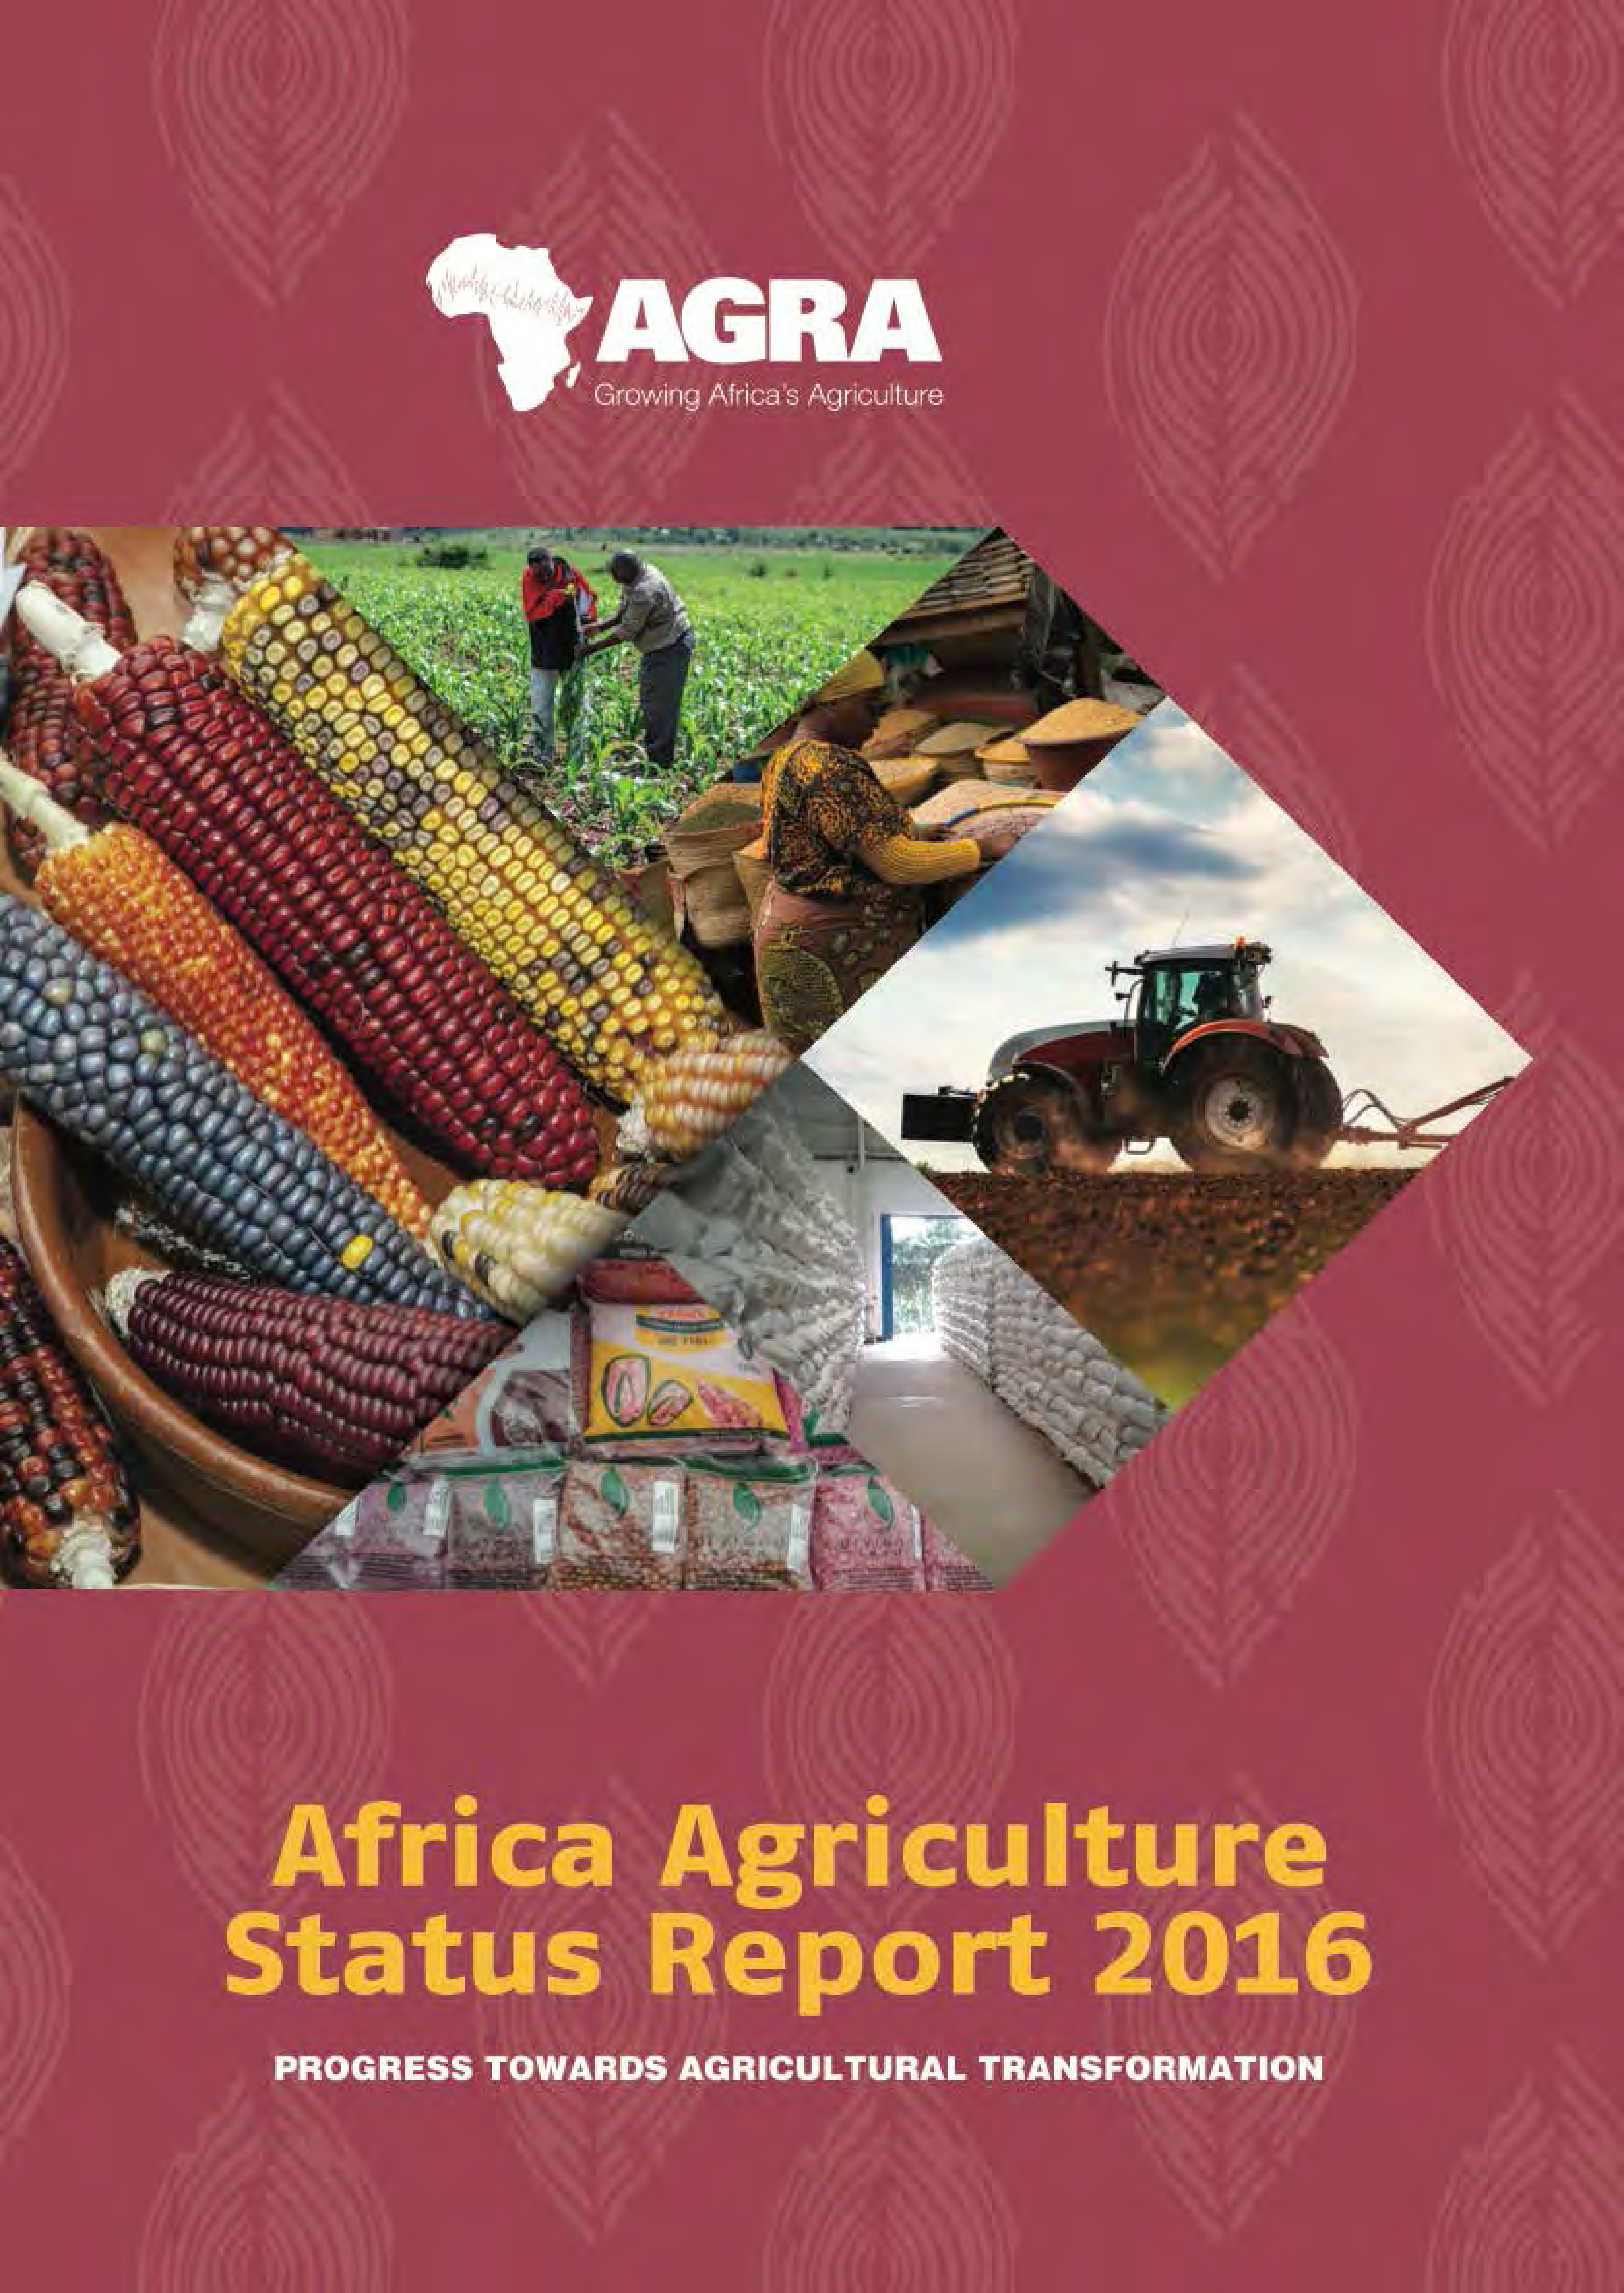 New report finds ten years on, African countries that embraced agriculture saw food production, GDP and nutrition all improve